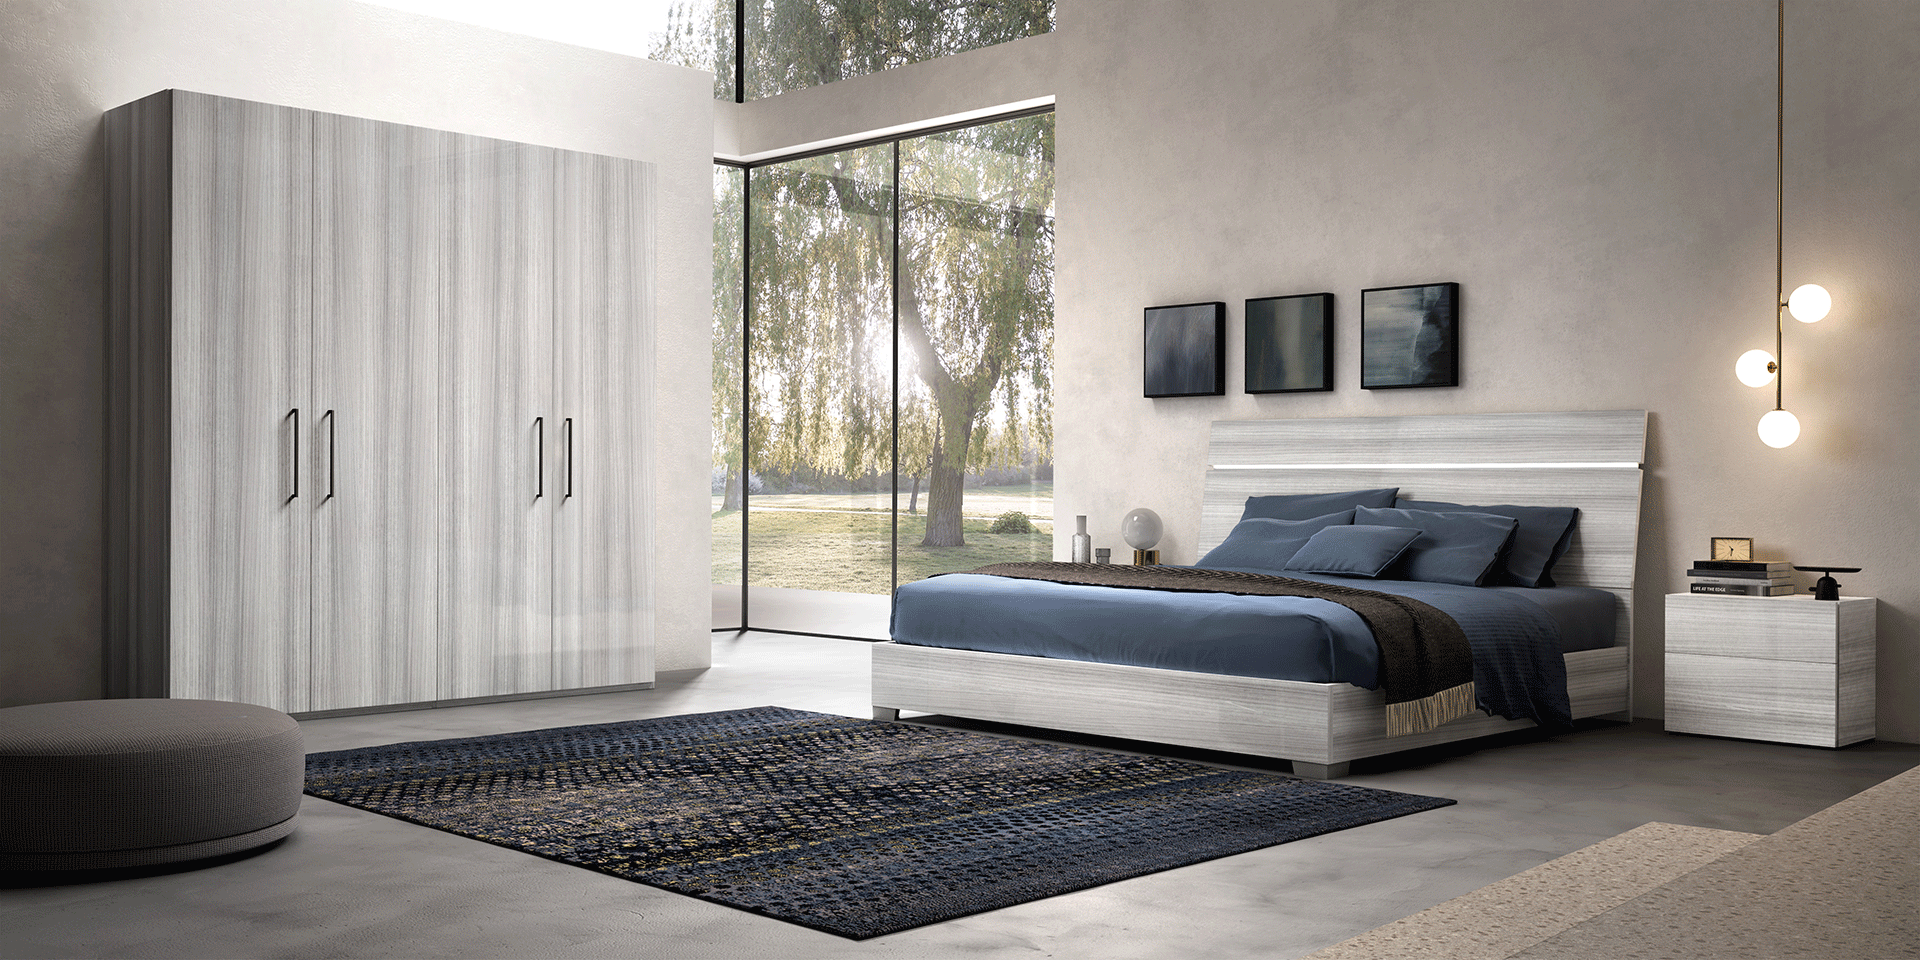 Bedroom Furniture Modern Bedrooms QS and KS Mia Bedroom Additional items